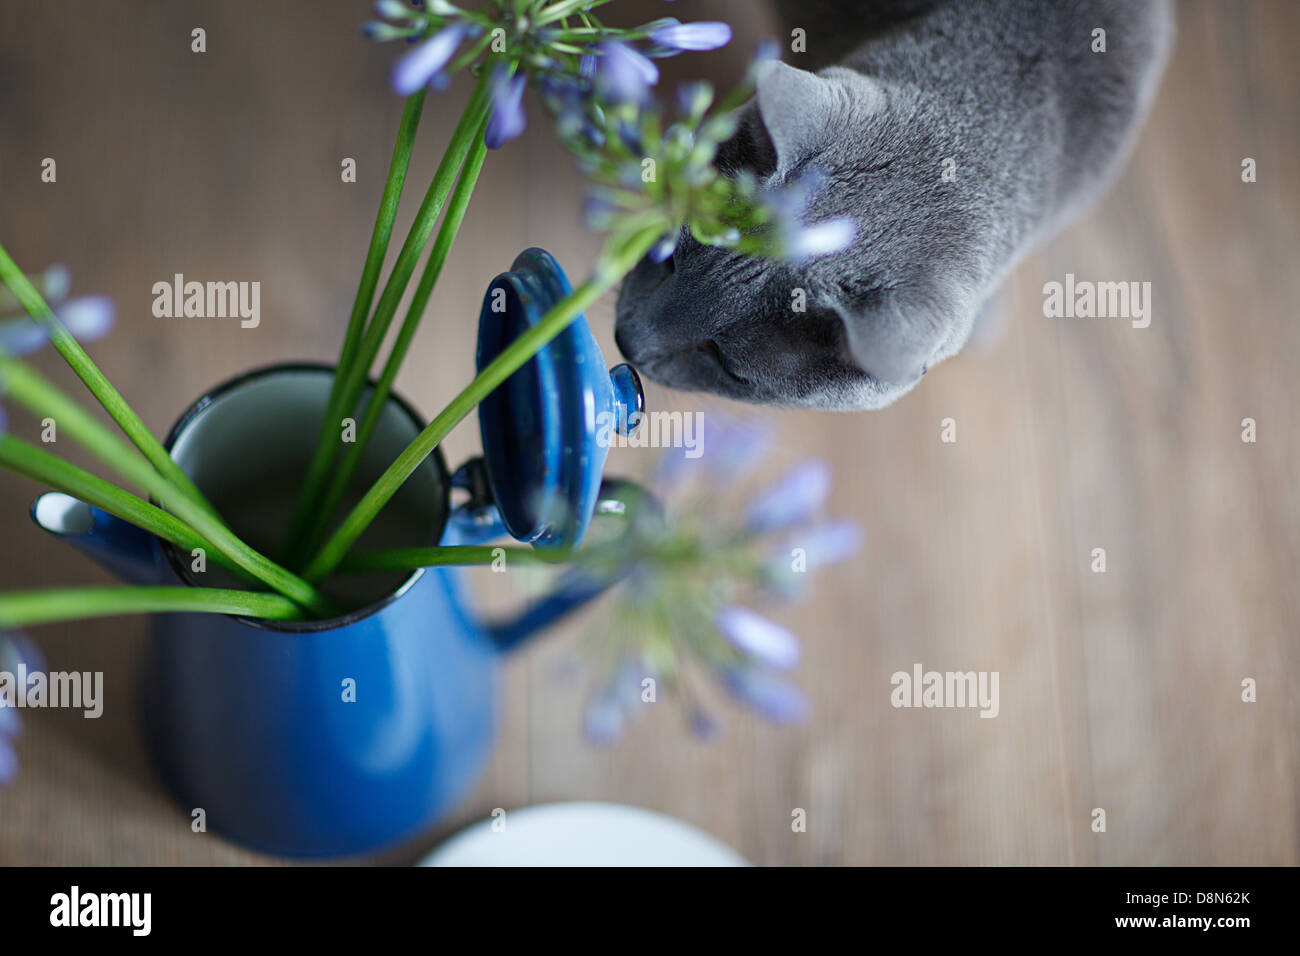 Cat and Flowers Stock Photo